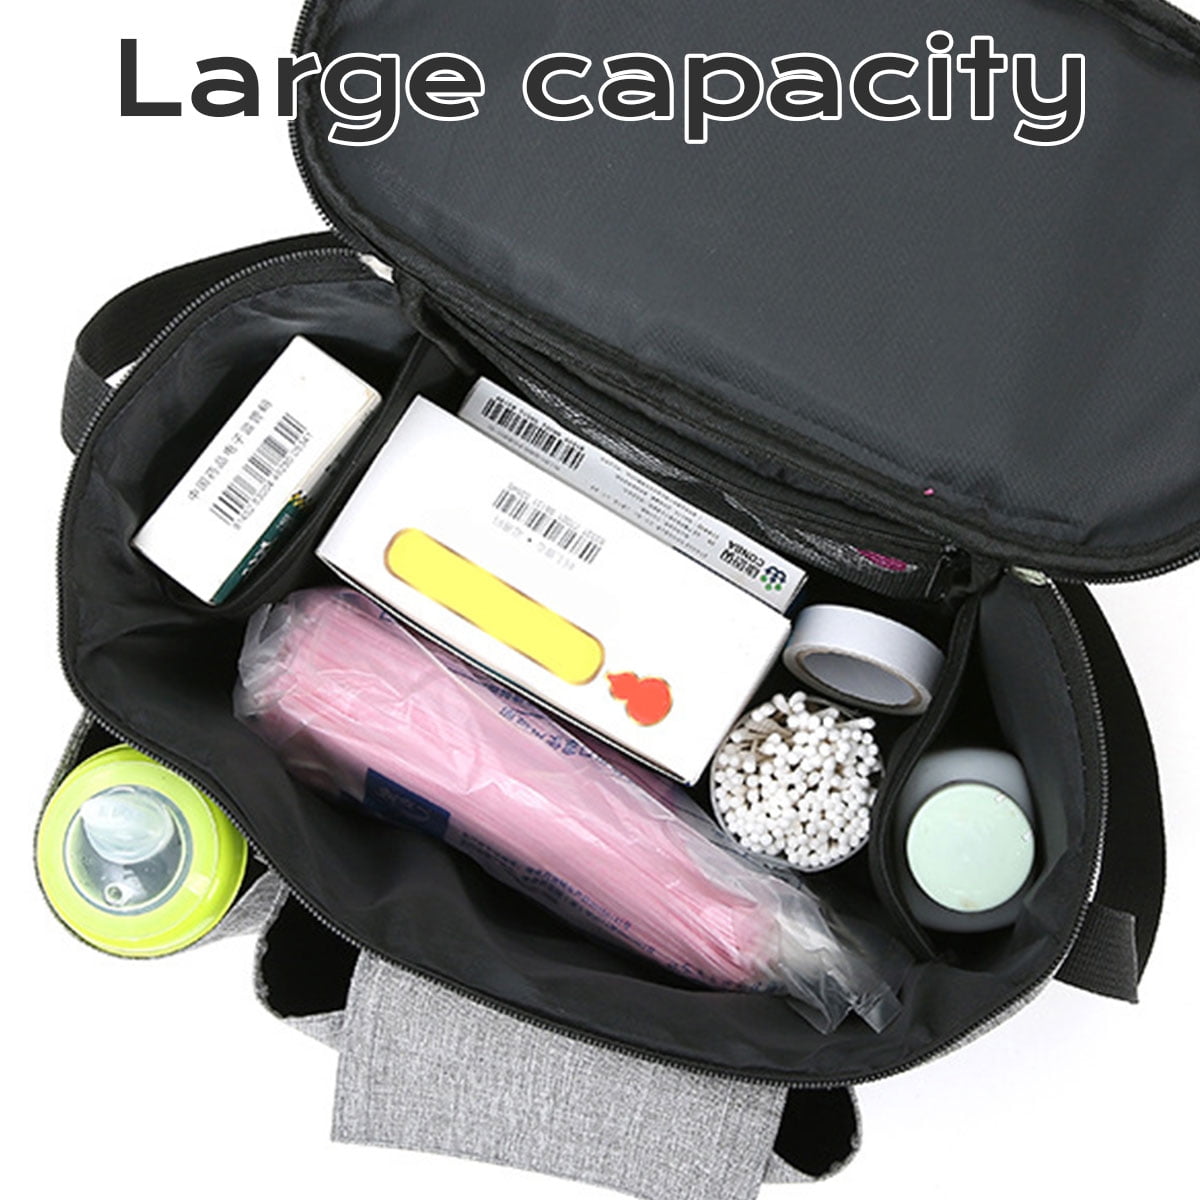 Universal Bag Organizer with Bottle Compartiment